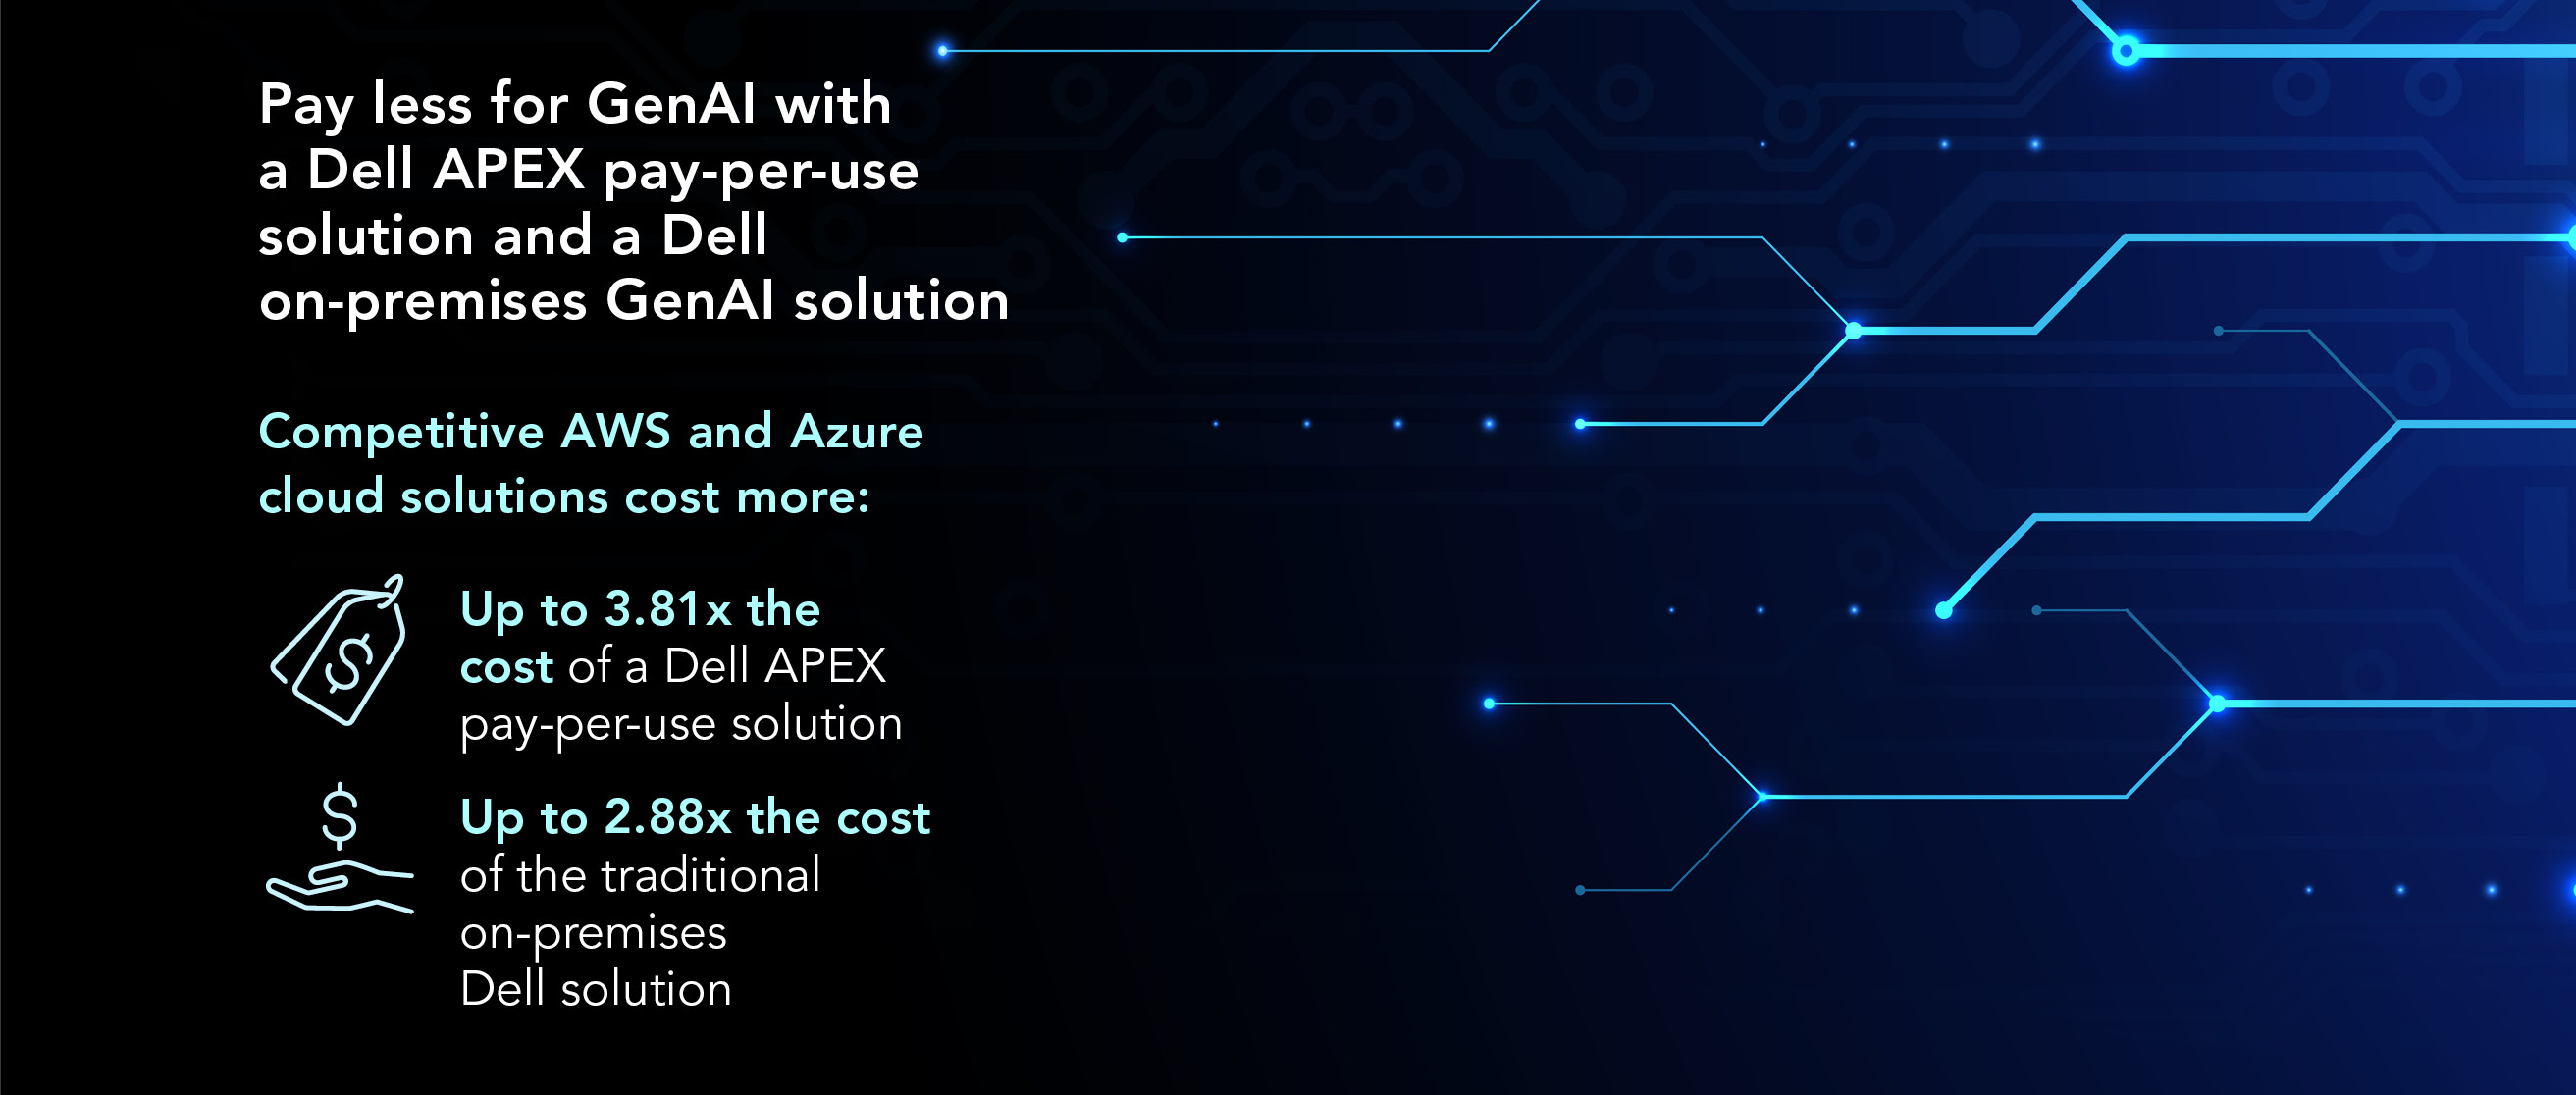 Pay less for GenAI with a Dell APEX pay-per-use solution and a Dell on-premises GenAI solution. Competitive AWS and Azure solutions cost more: Up to 3.81x the cost of a Dell APEX pay-per-use solution and up to 2.88x the cost of the traditional on-premises Dell solution.